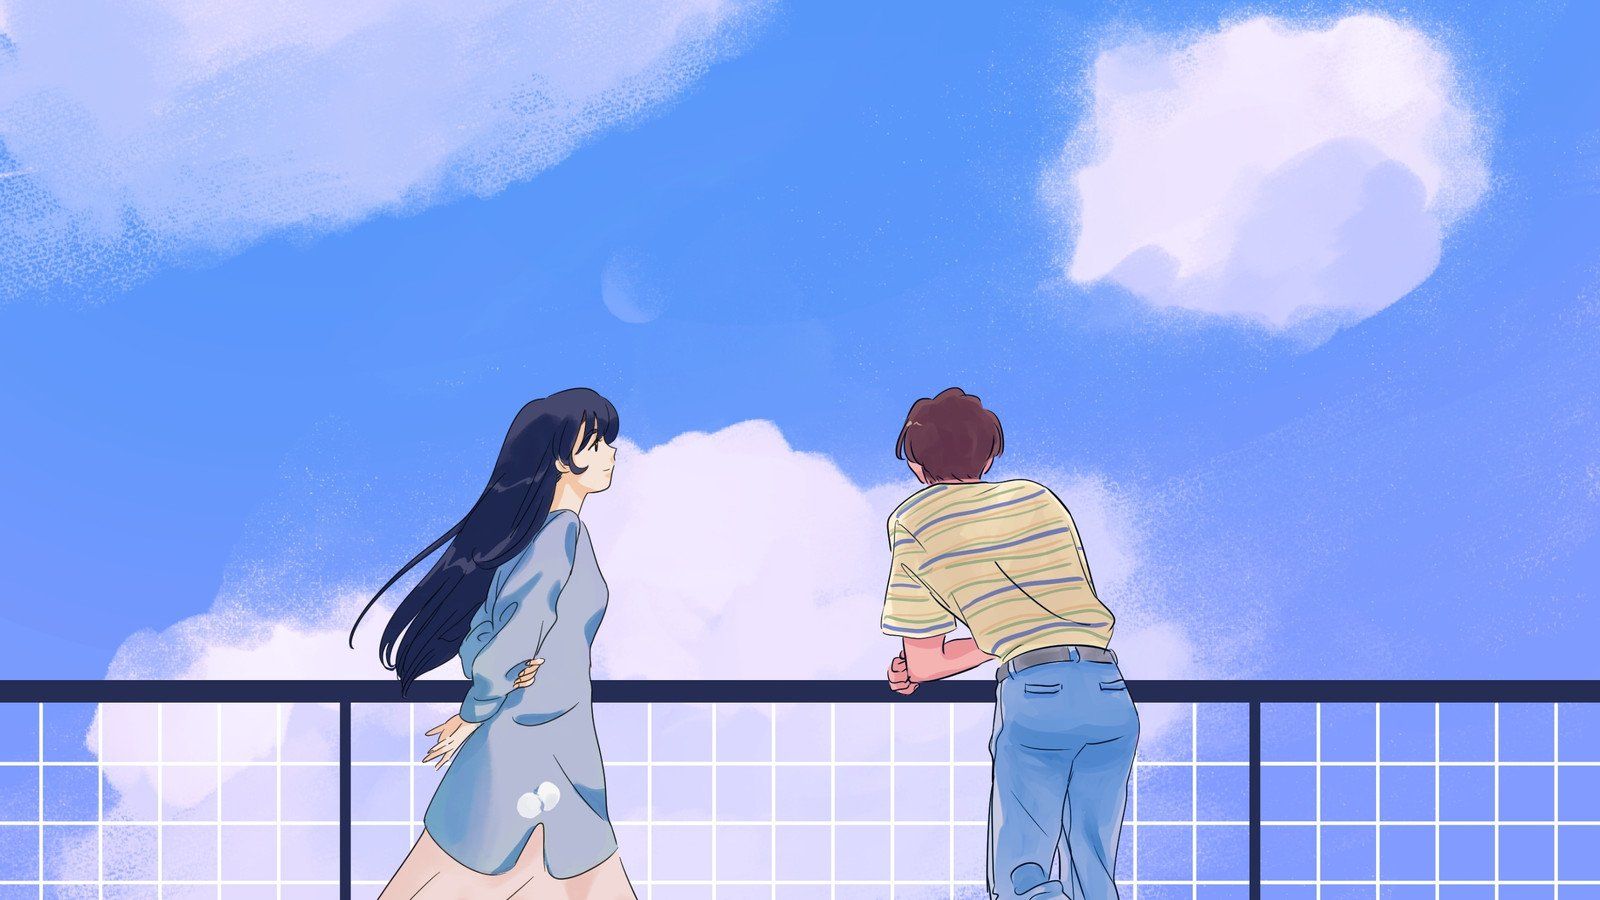 A couple of people standing on the sidewalk - Blue anime